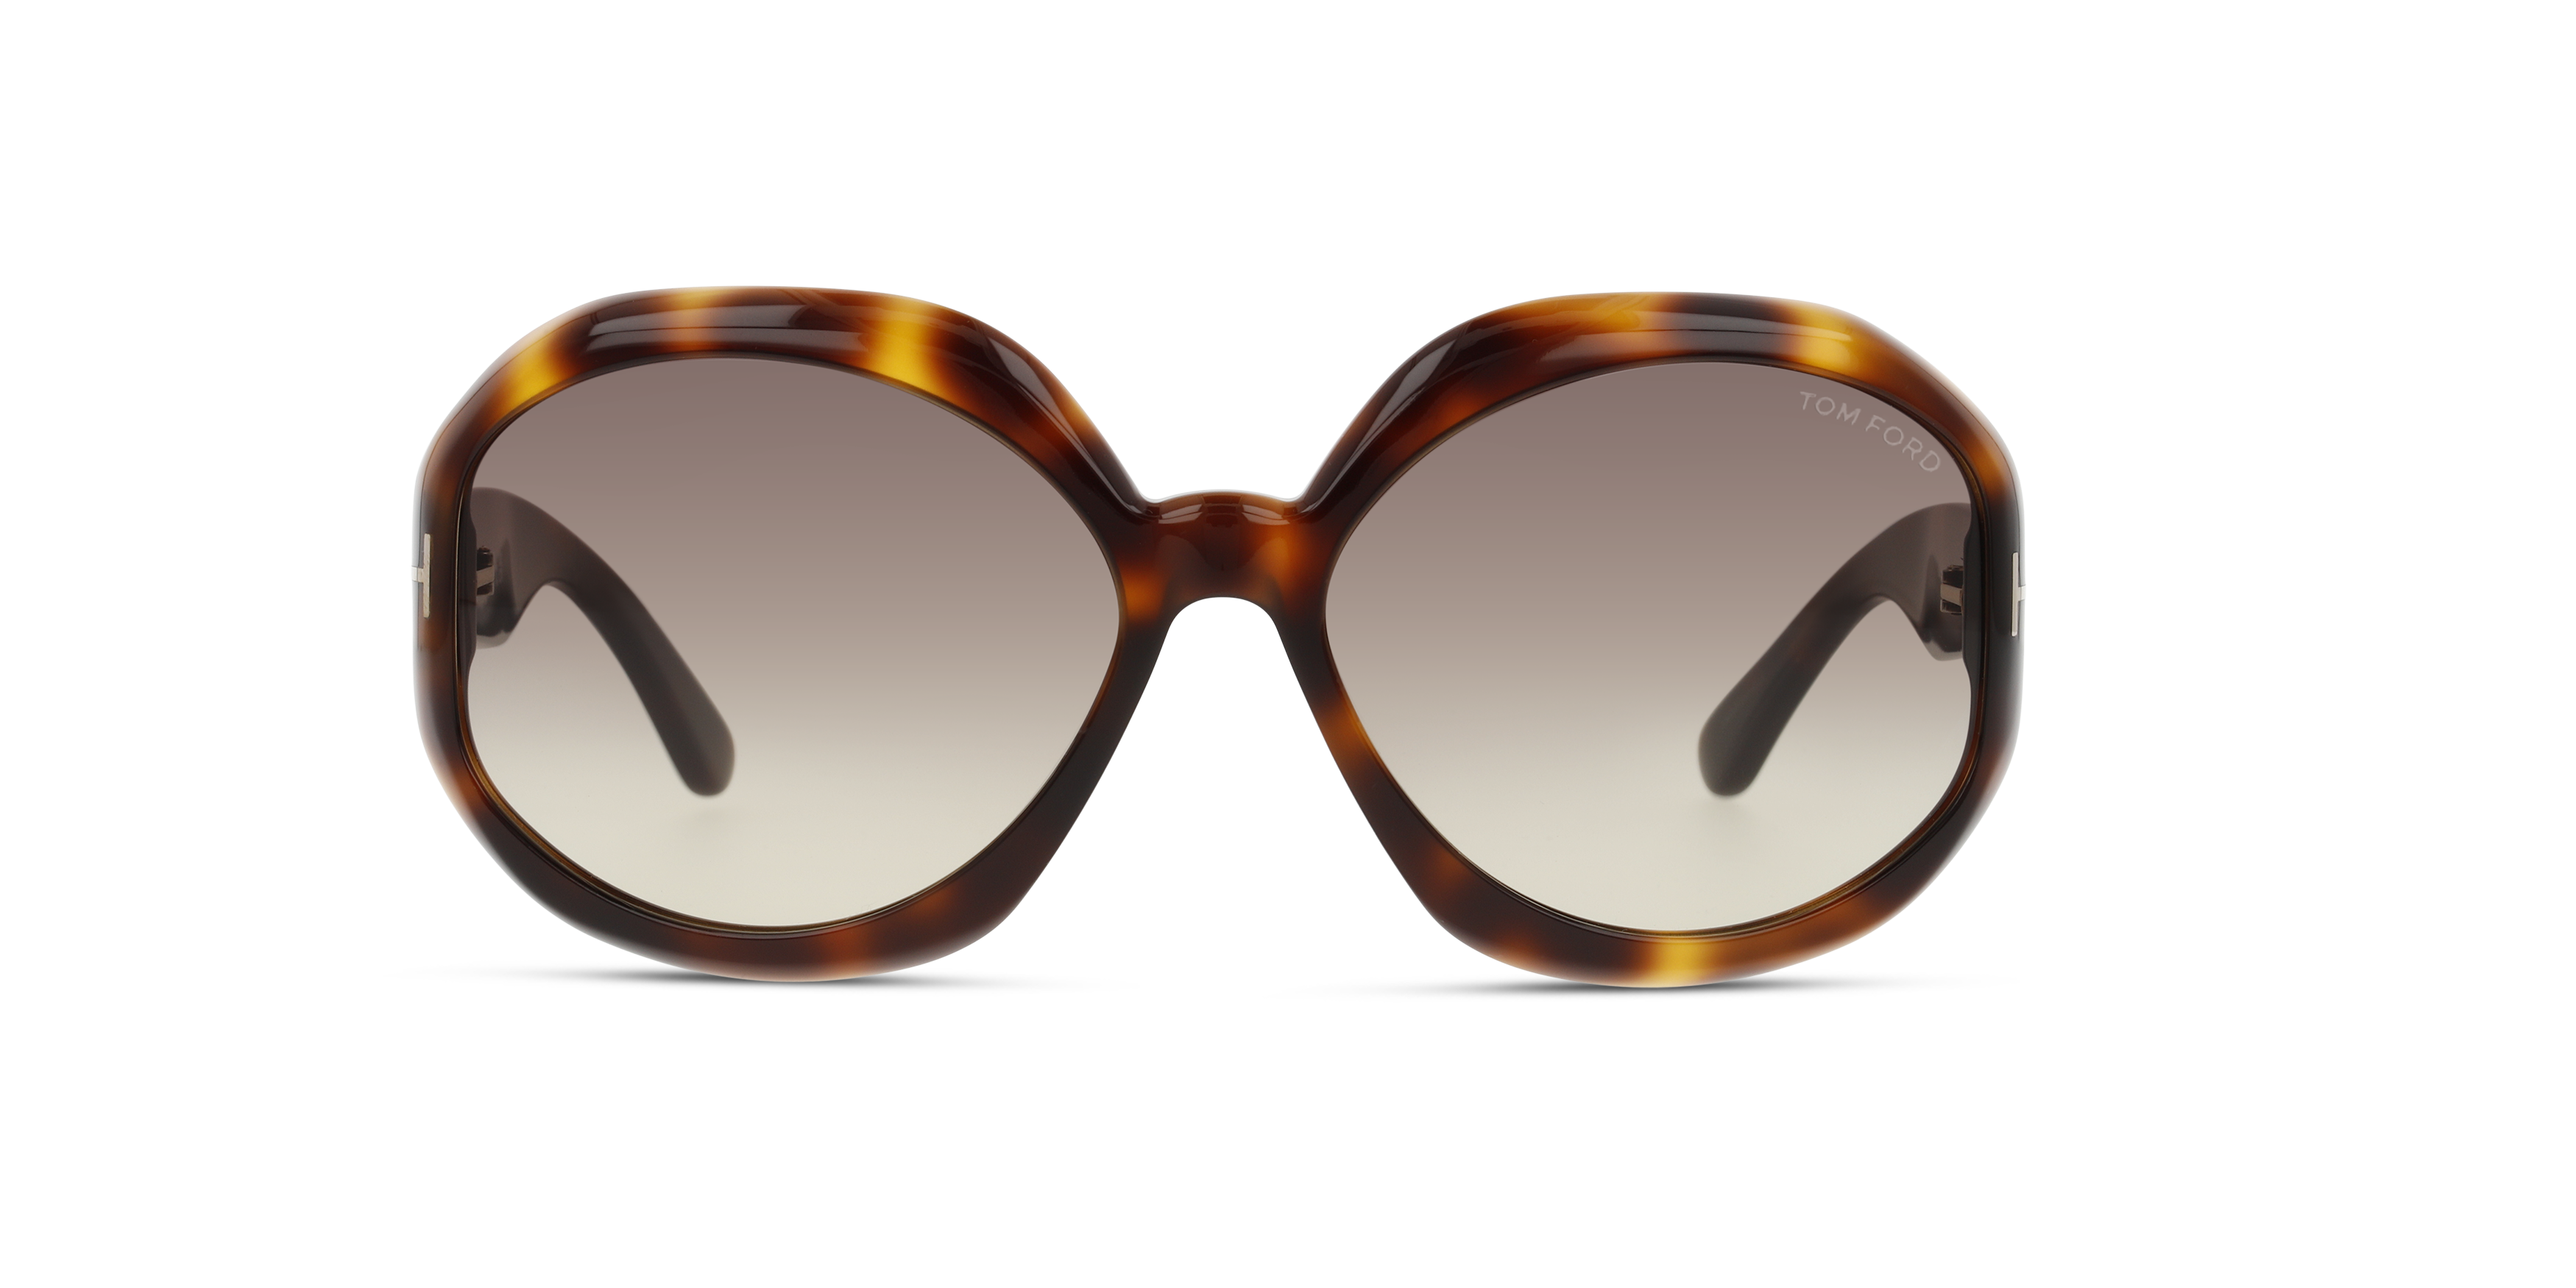 [products.image.front] Tom Ford FT1011 52B